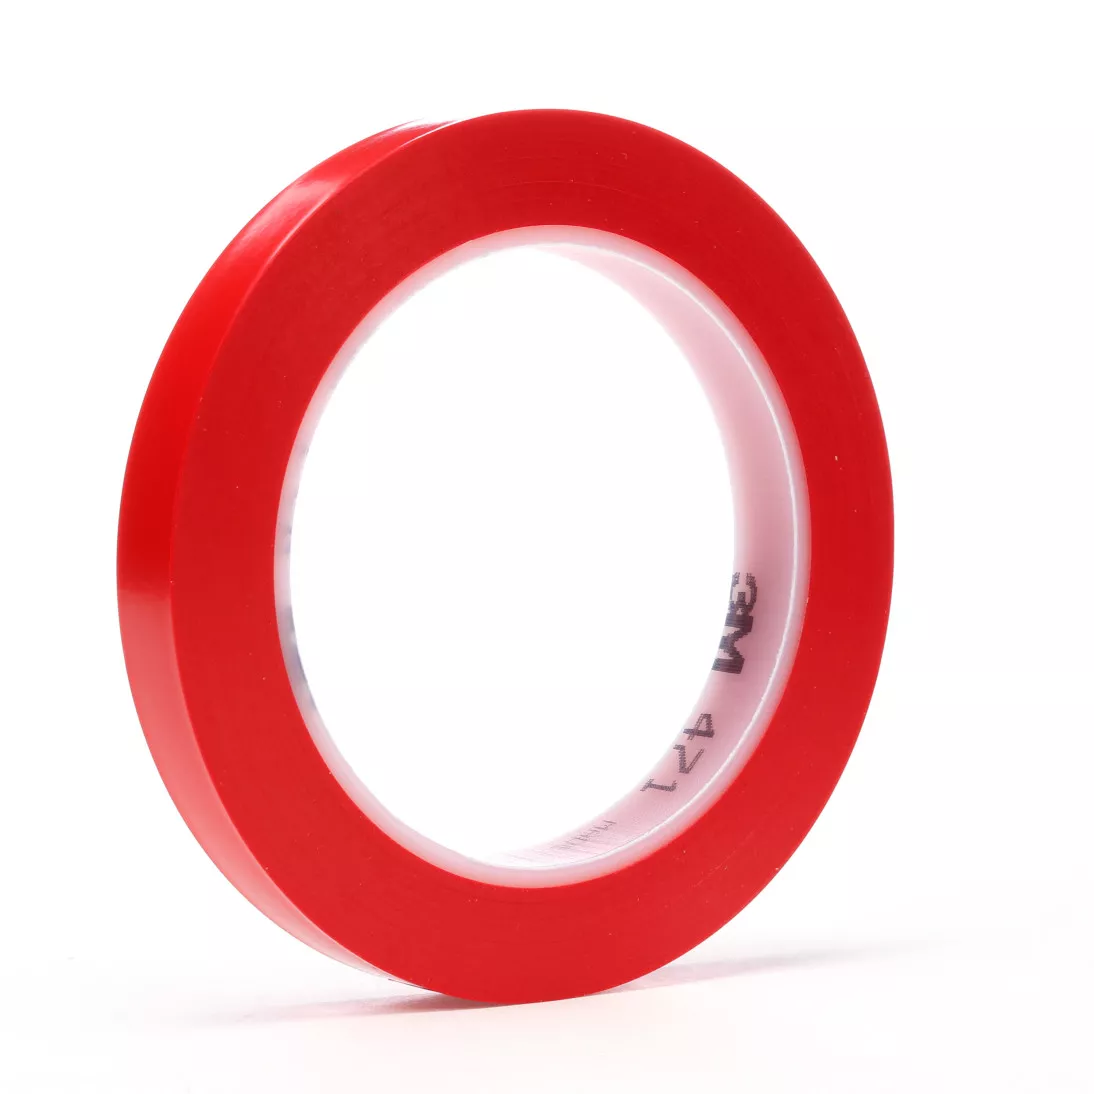 3M™ Vinyl Tape 471, Red, 1/8 in x 36 yd, 5.2 mil, 144 rolls per case,
Individually Wrapped Conveniently Packaged